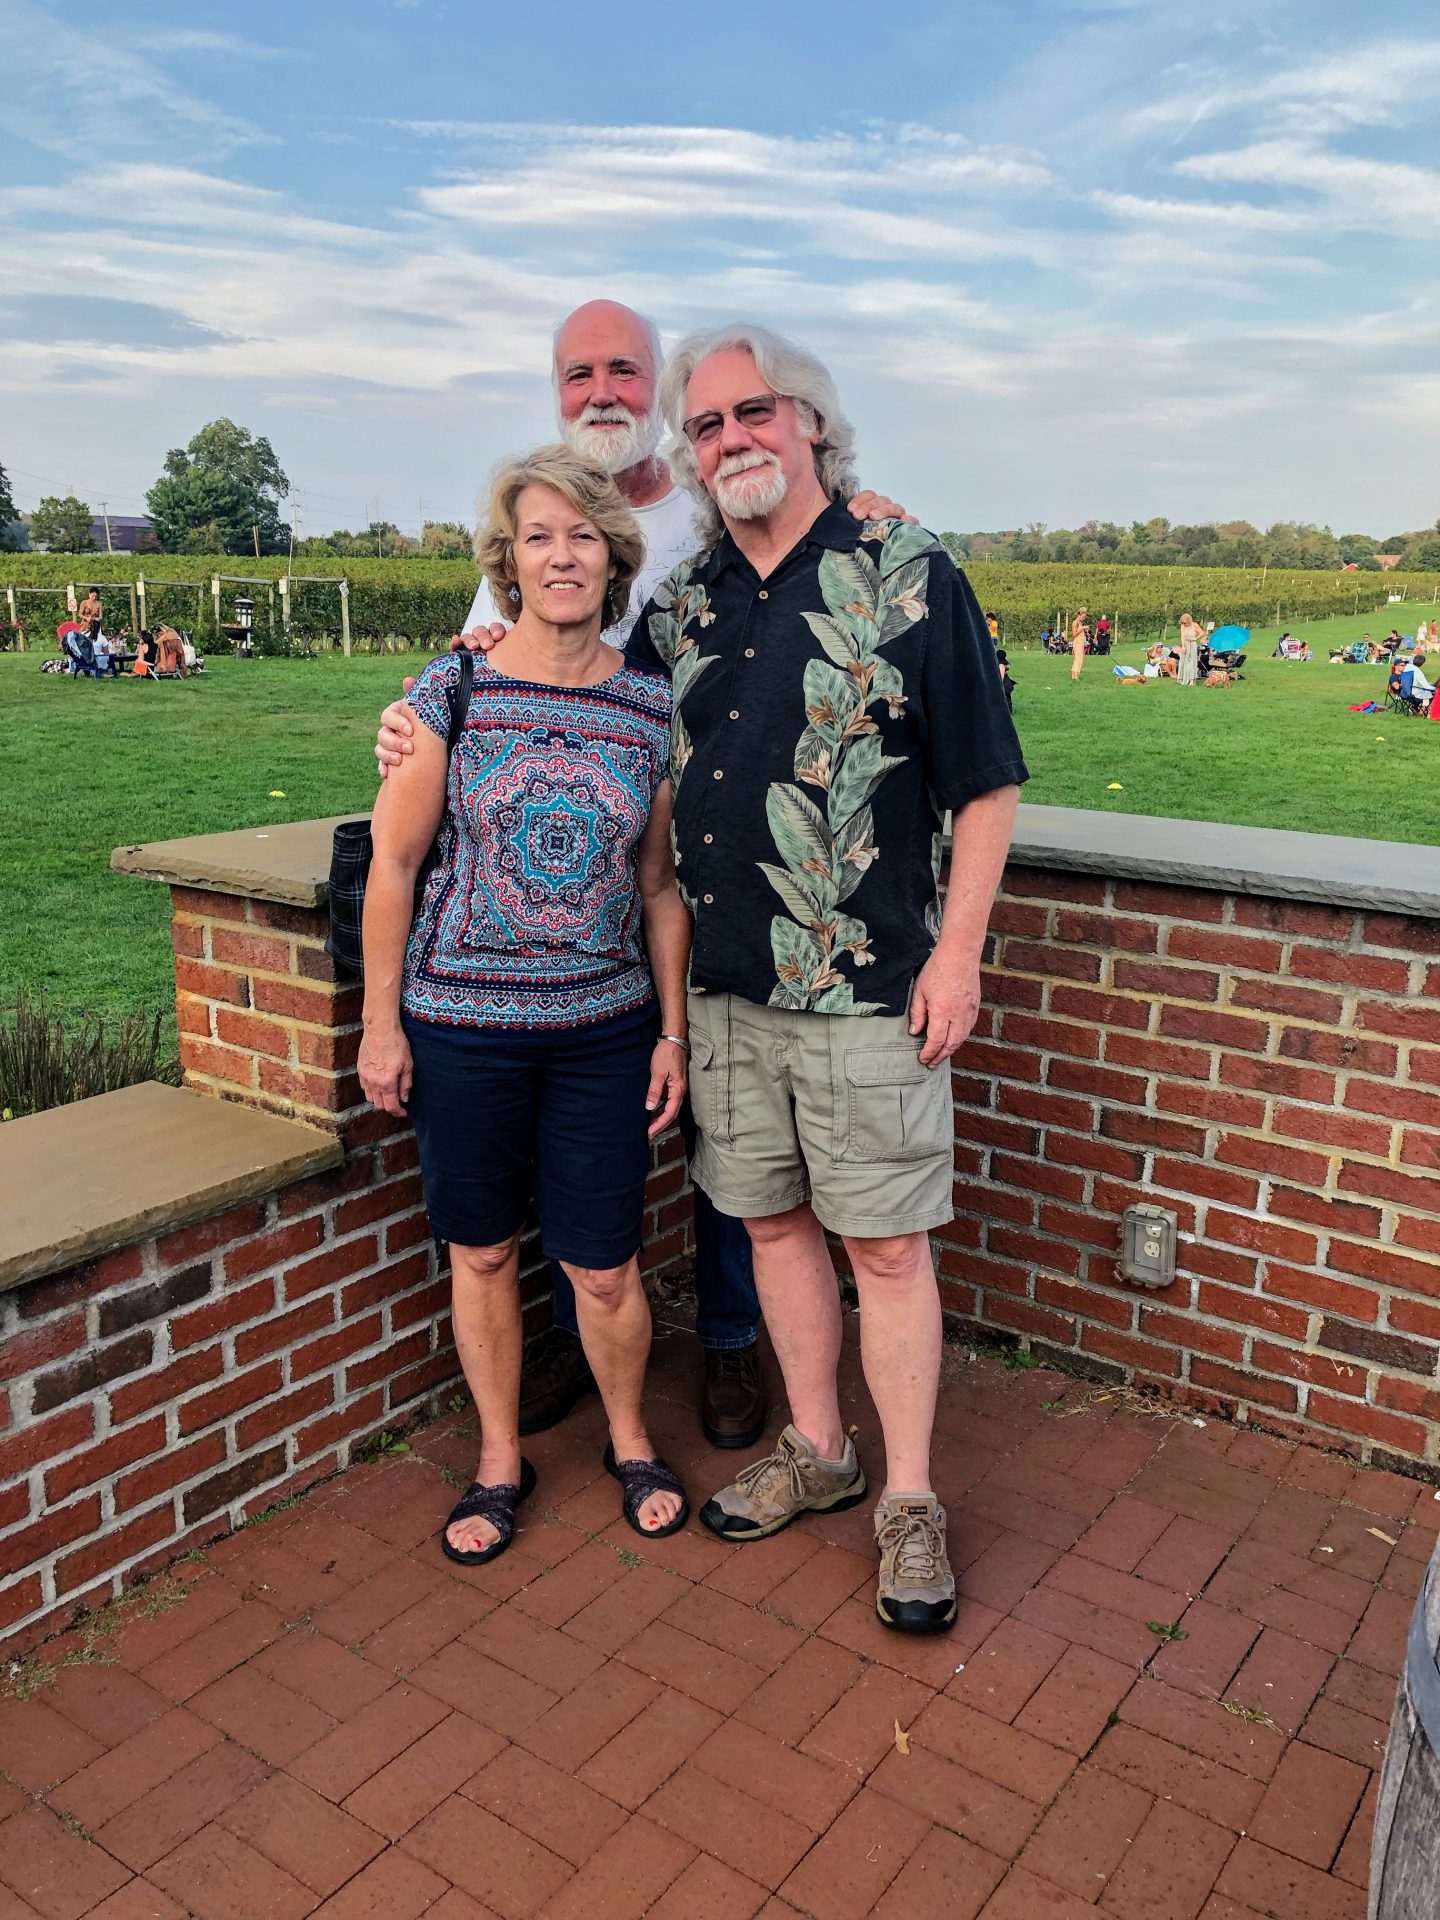 Sharon Rial, Bob Rial & Dave Duncan at Working Dog winery in New Jersey.<br />
October 3, 2021